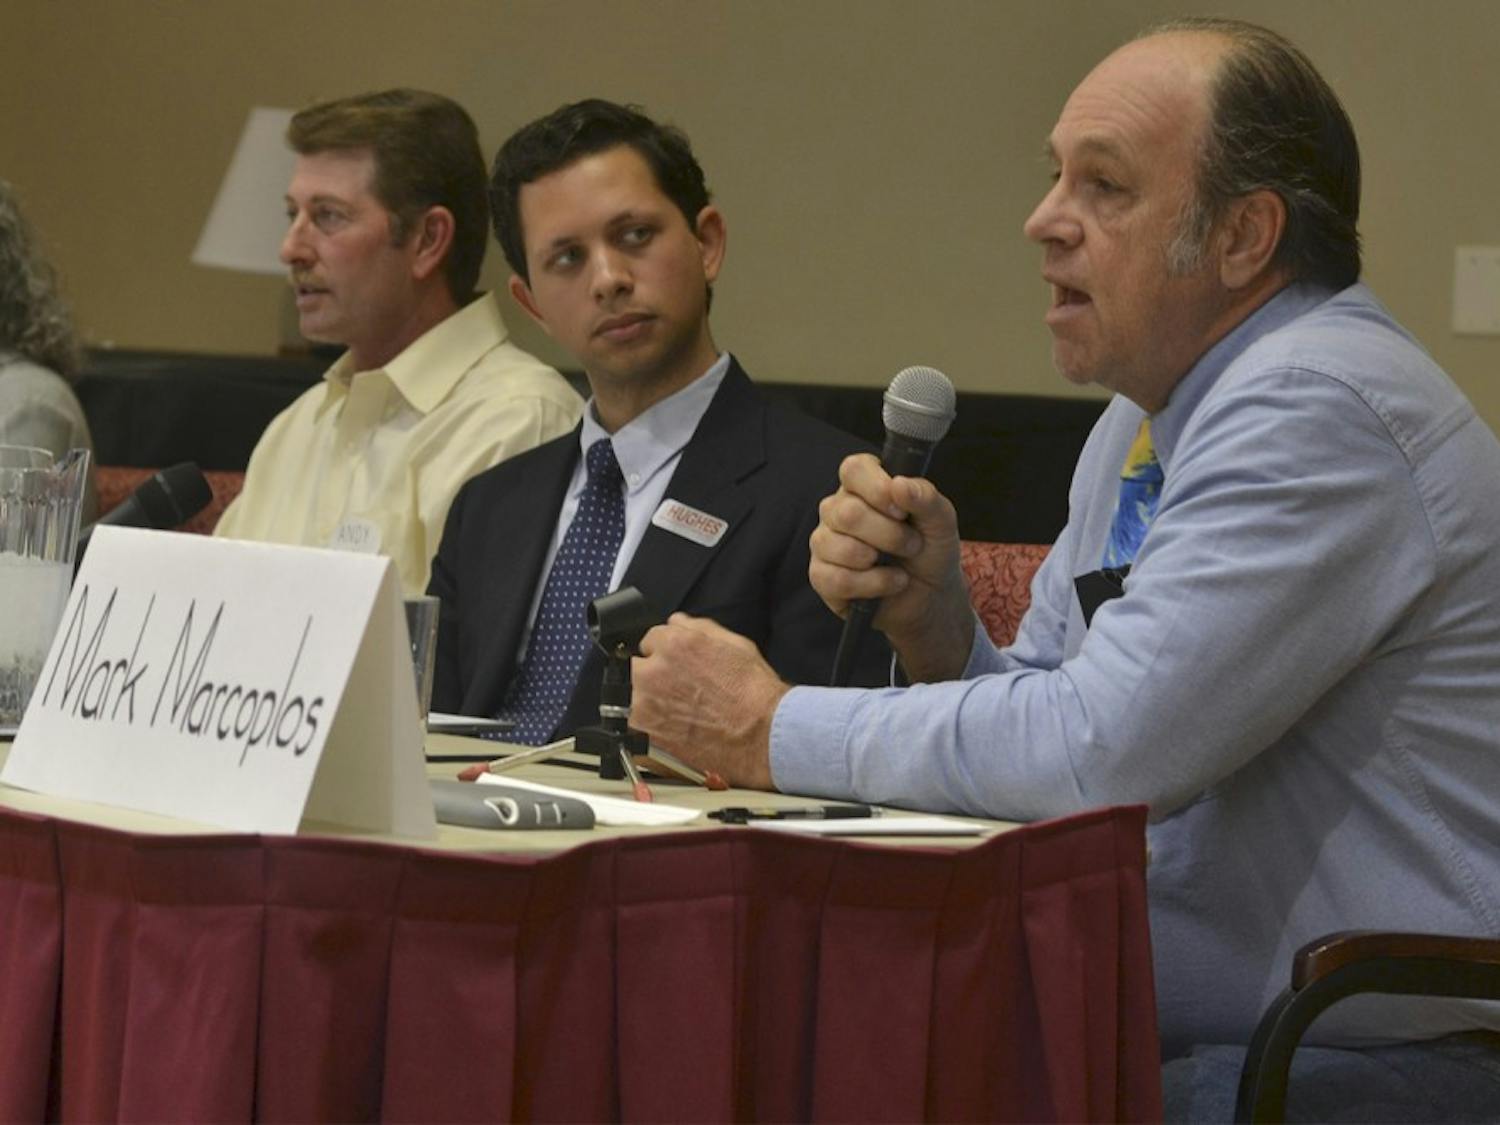 Marc Marcoplos responds to a question posed by a member of the audience. Candidates for the Orange County Board of Commissioners spoke at a forum on Tuesday afternoon, March 1.